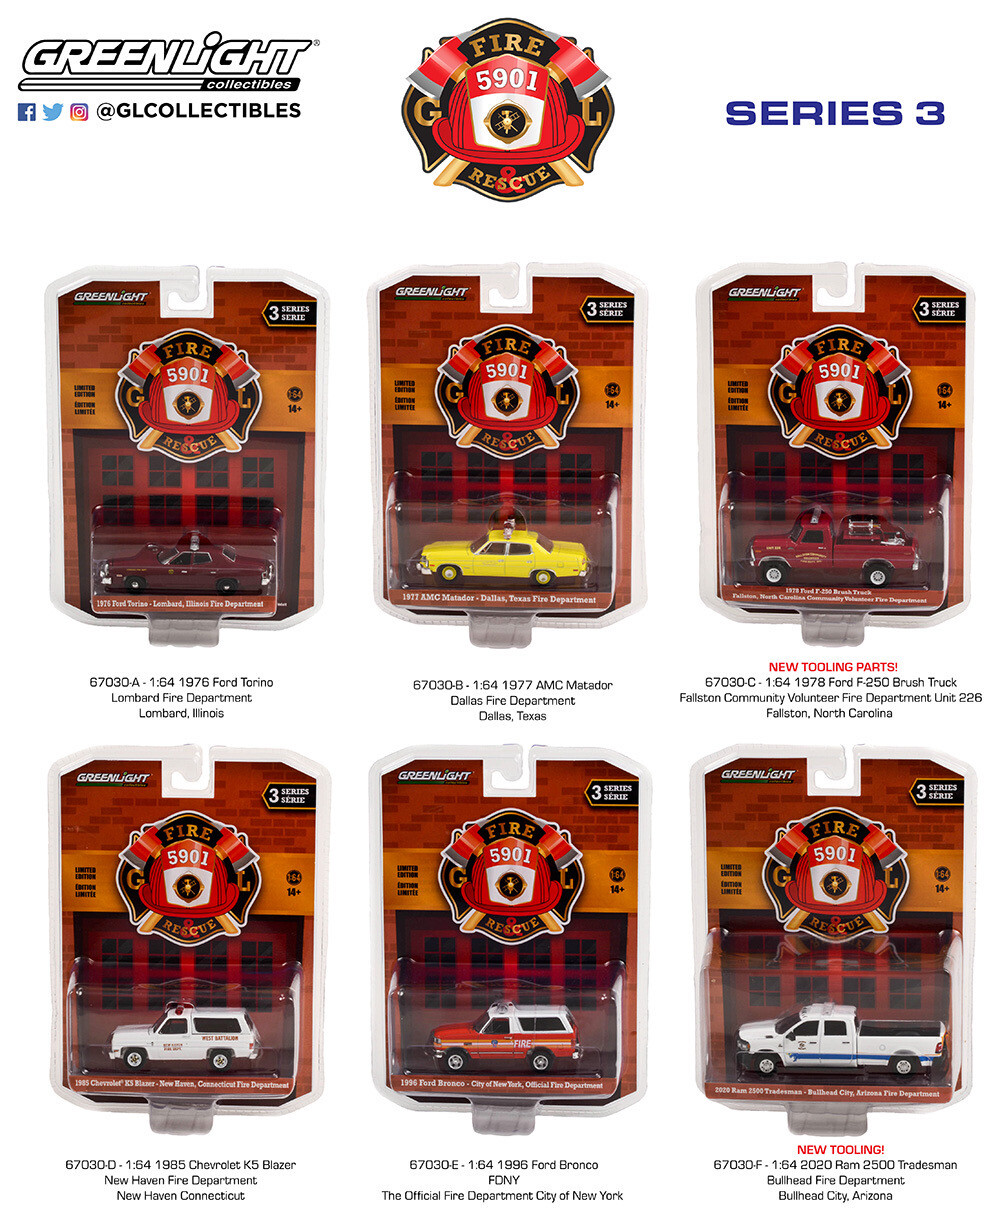 Fire and Rescue series 3